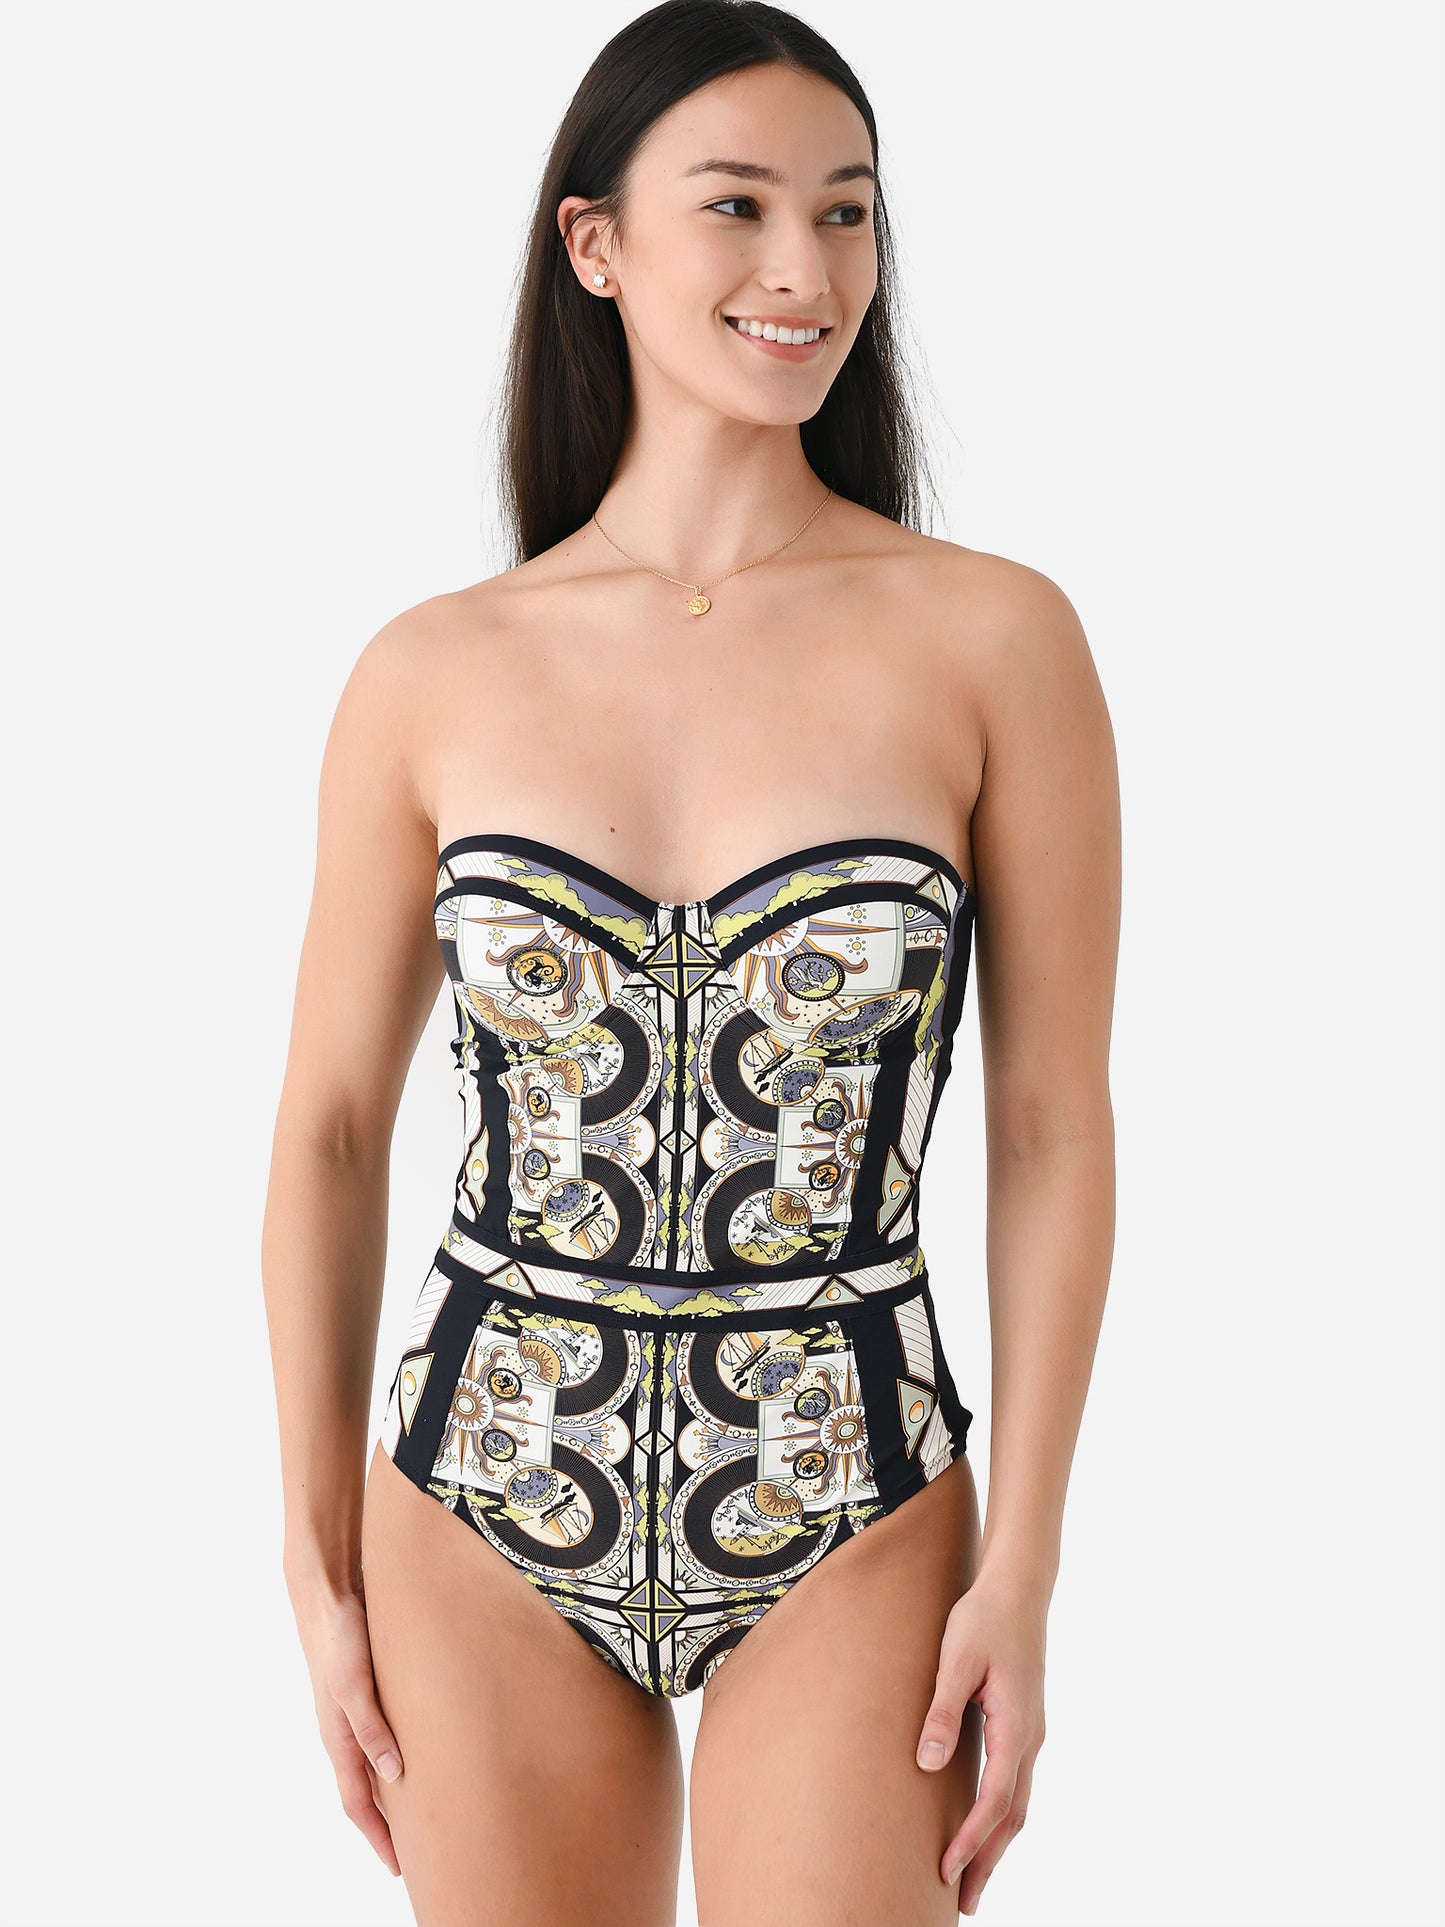 Tory Burch Women's Printed Underwire One-Piece Swimsuit